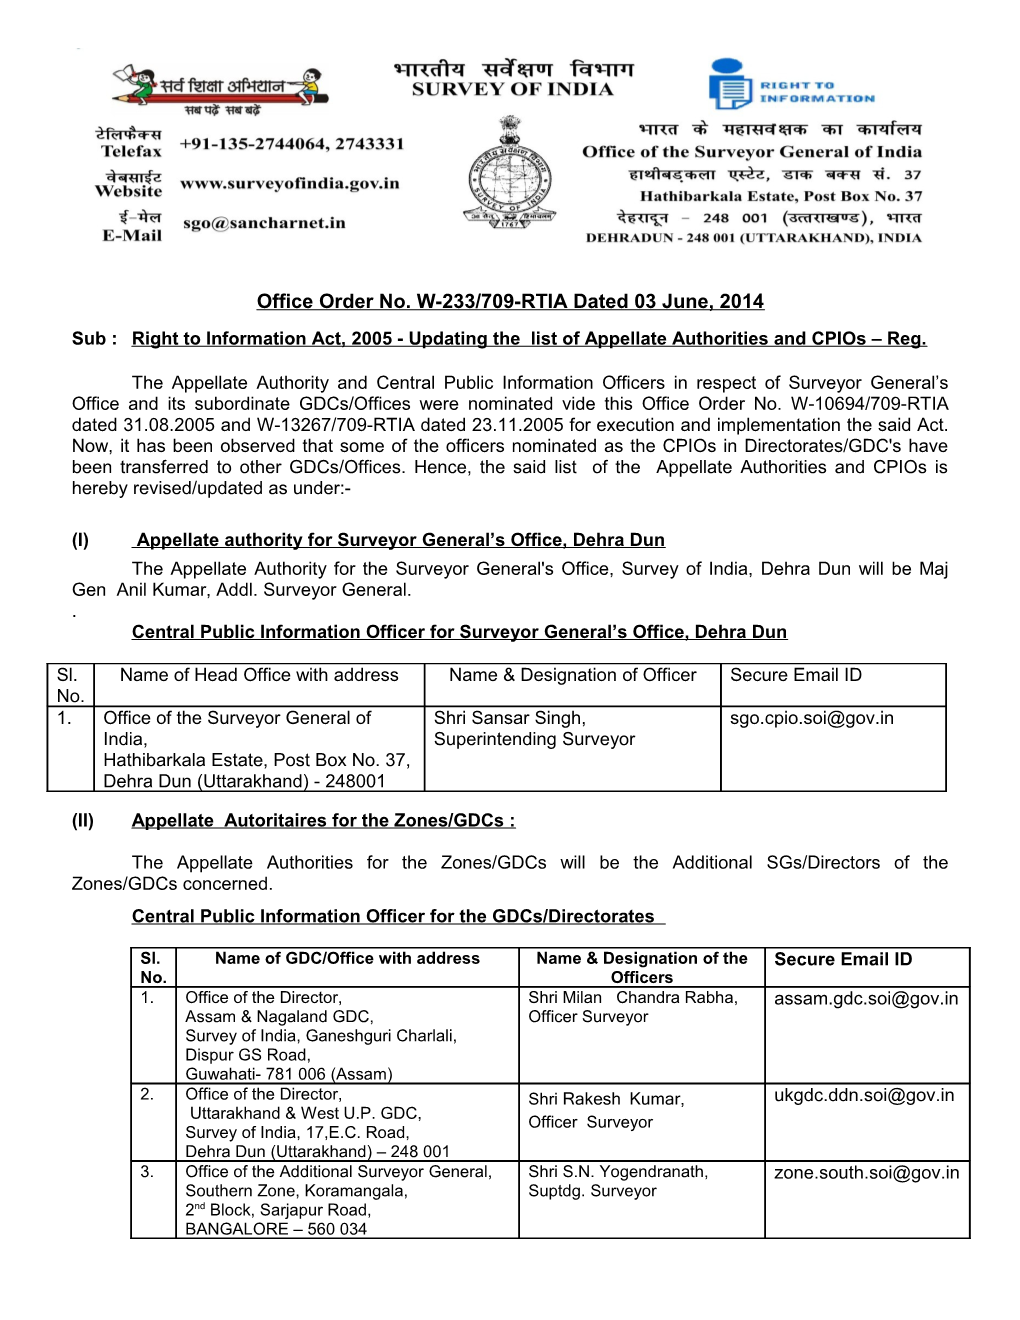 Office Order No. W-233/709-RTIA Dated 03June, 2014